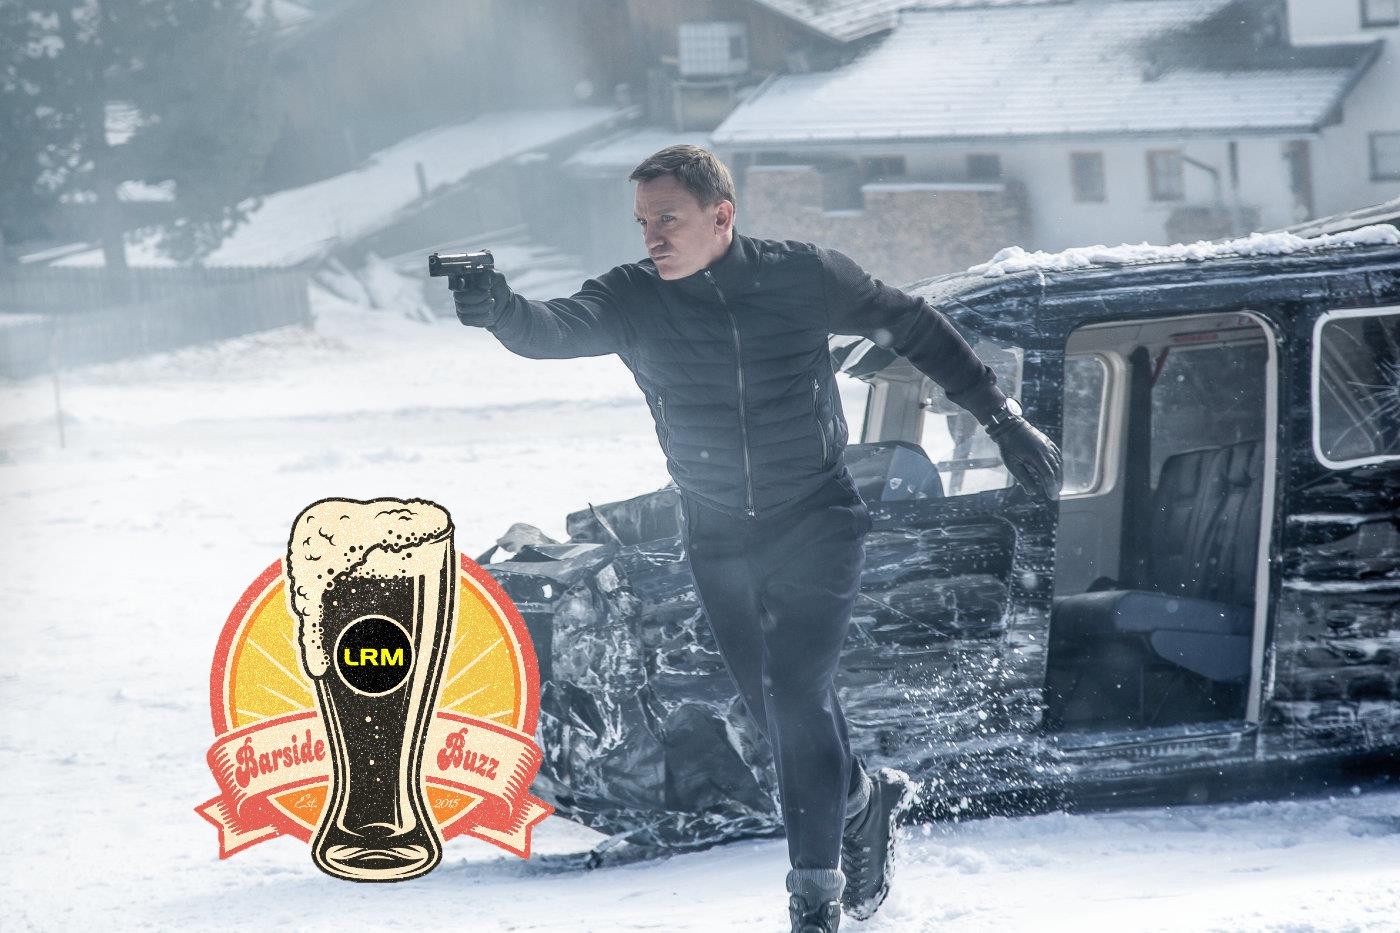 James Bond Could [SPOILERS] In No Time To Die | LRM’s Barside Buzz